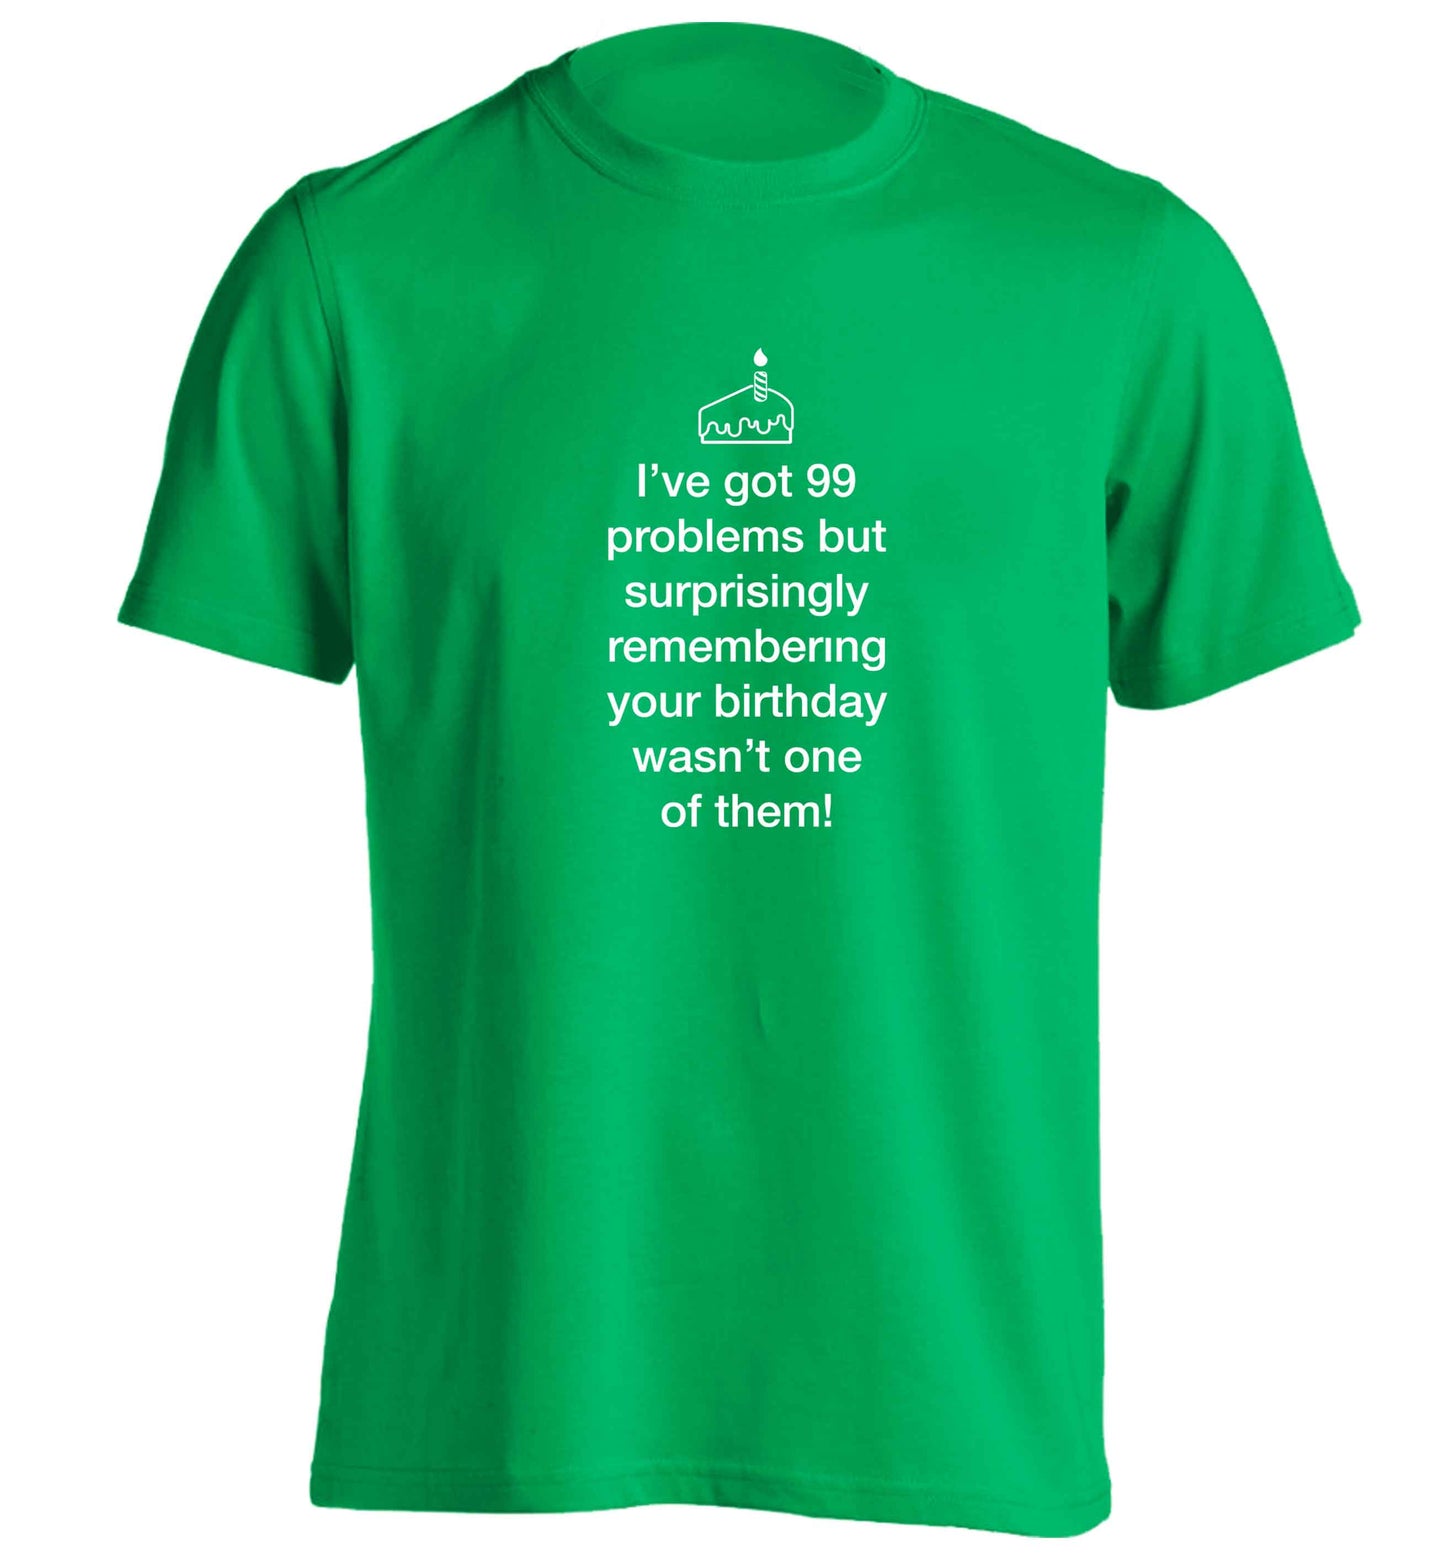 I've got 99 problems but surprisingly remembering your birthday wasn't one of them! adults unisex green Tshirt 2XL